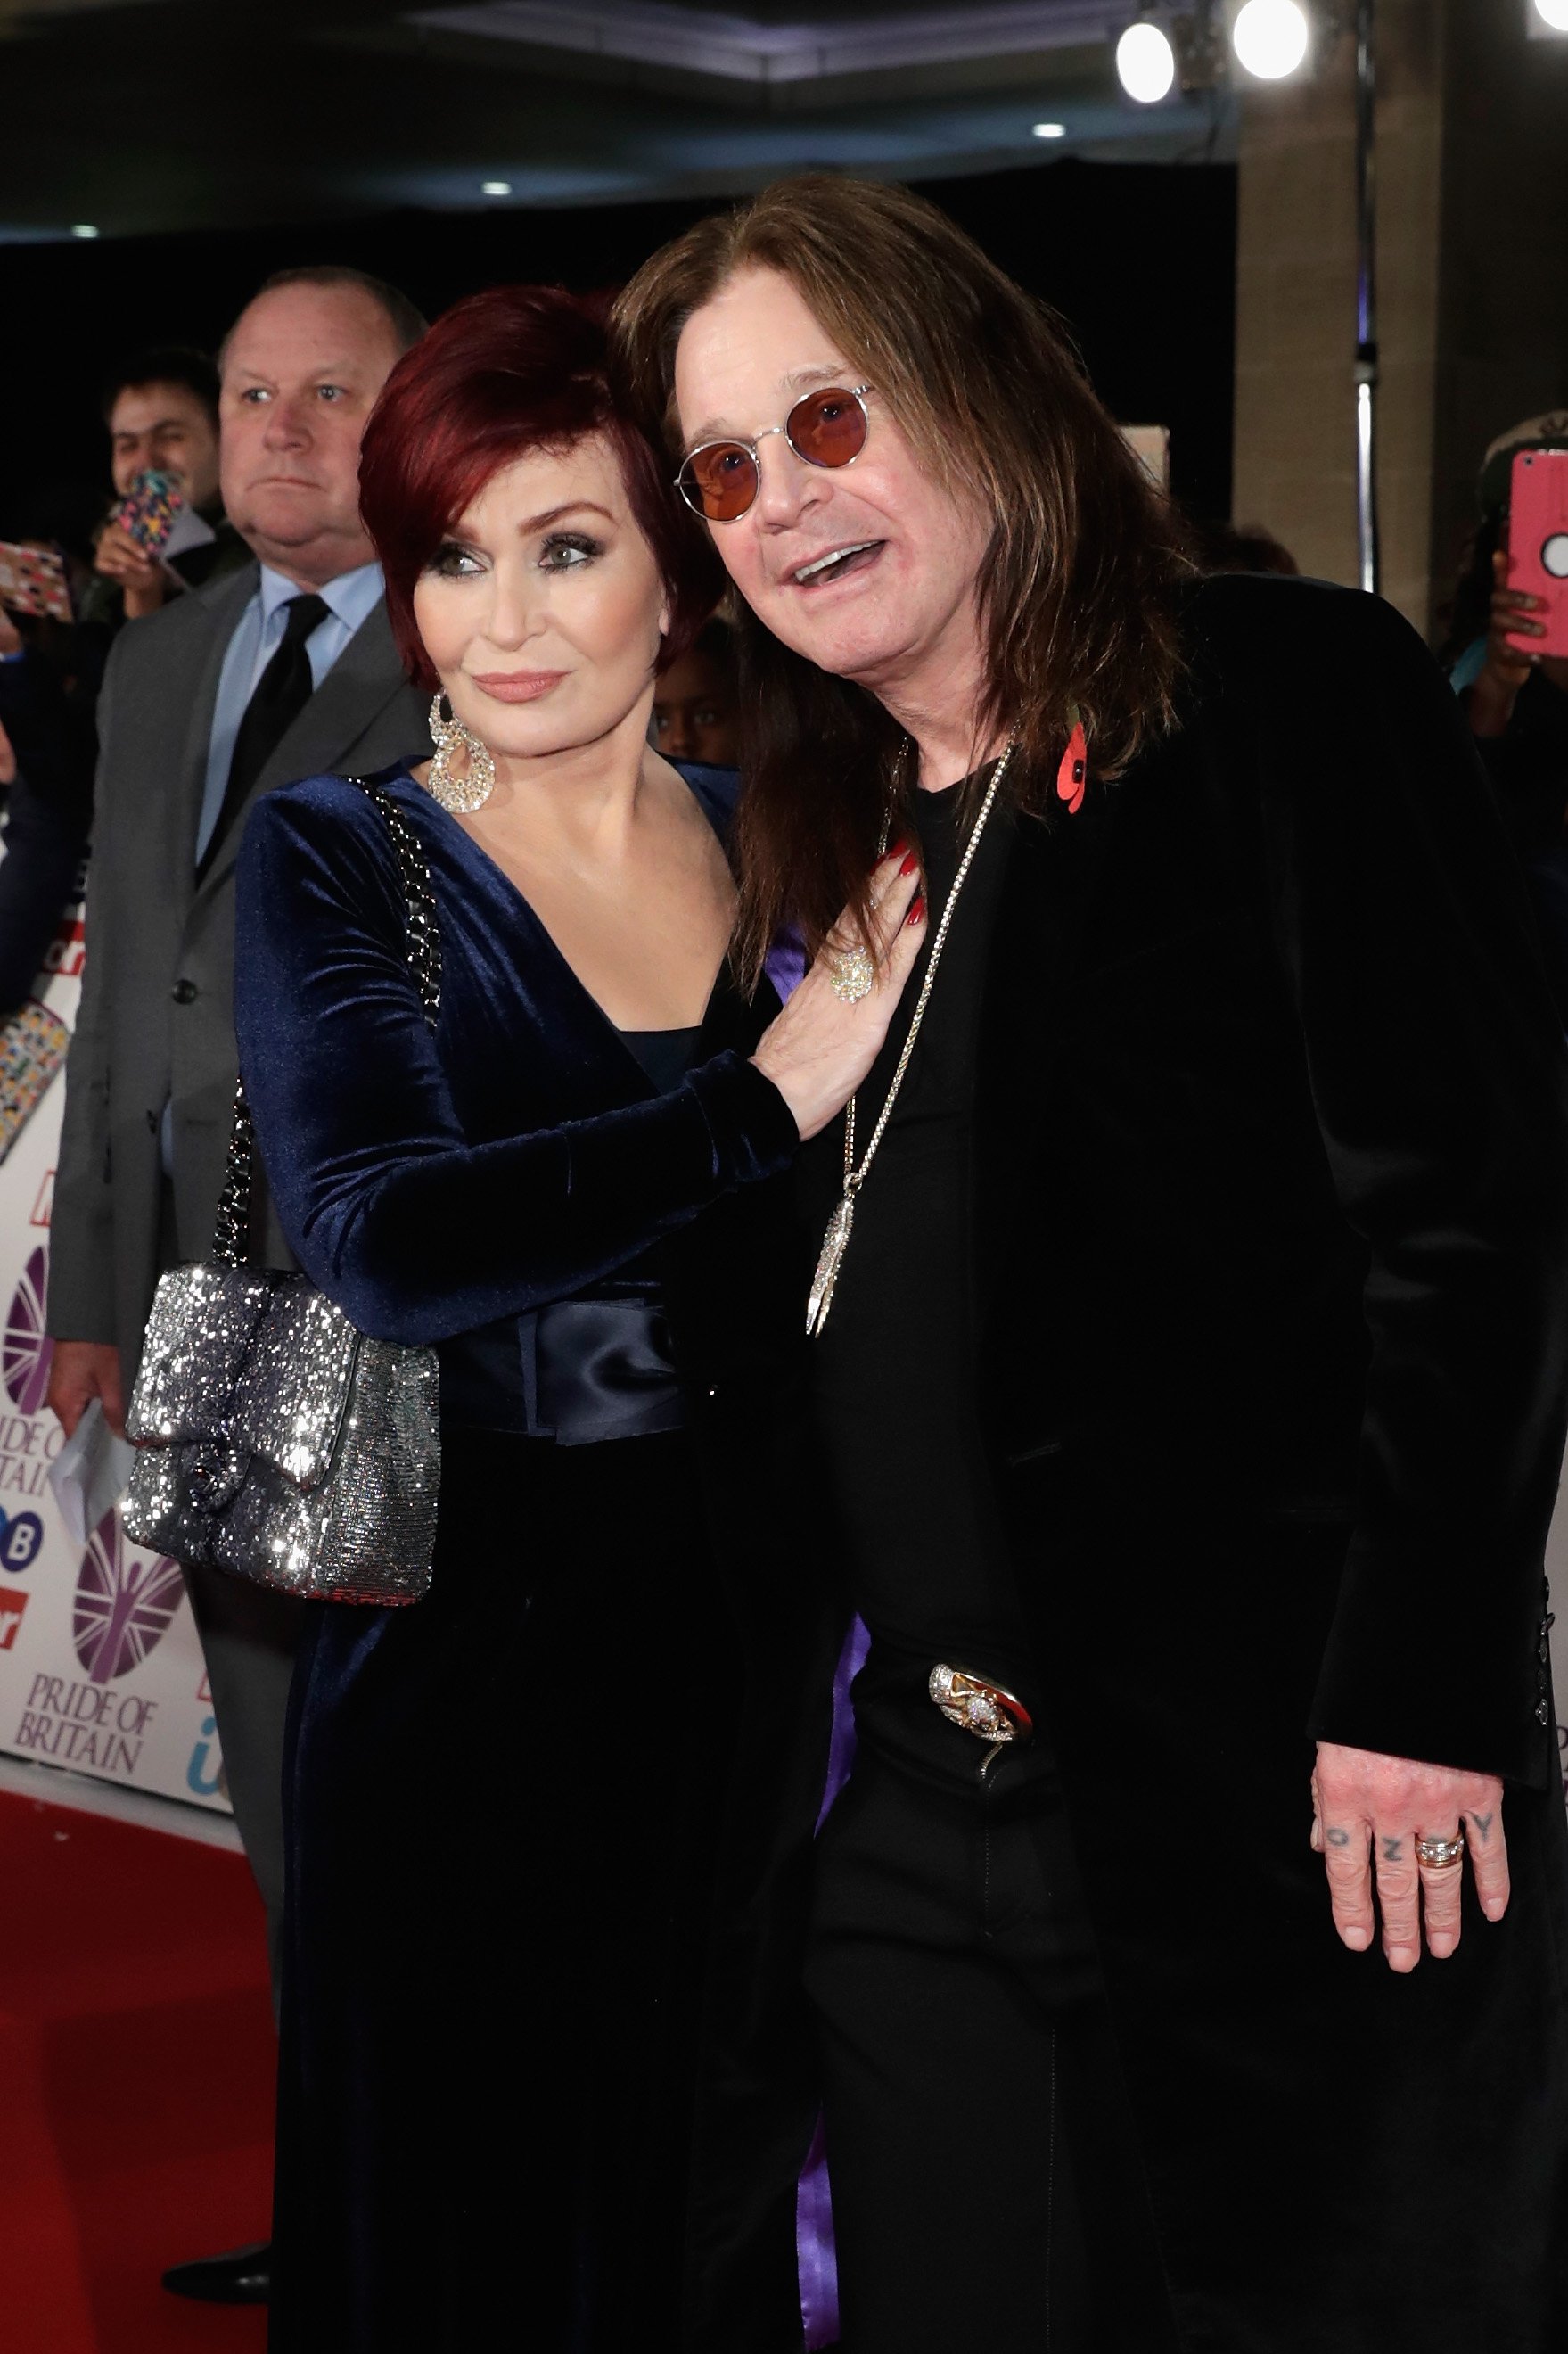 Sharon Osbourne and Ozzy Osbourne attend the Pride Of Britain Awards at Grosvenor House, on October 30, 2017, in London, England. | Source: Getty Images.